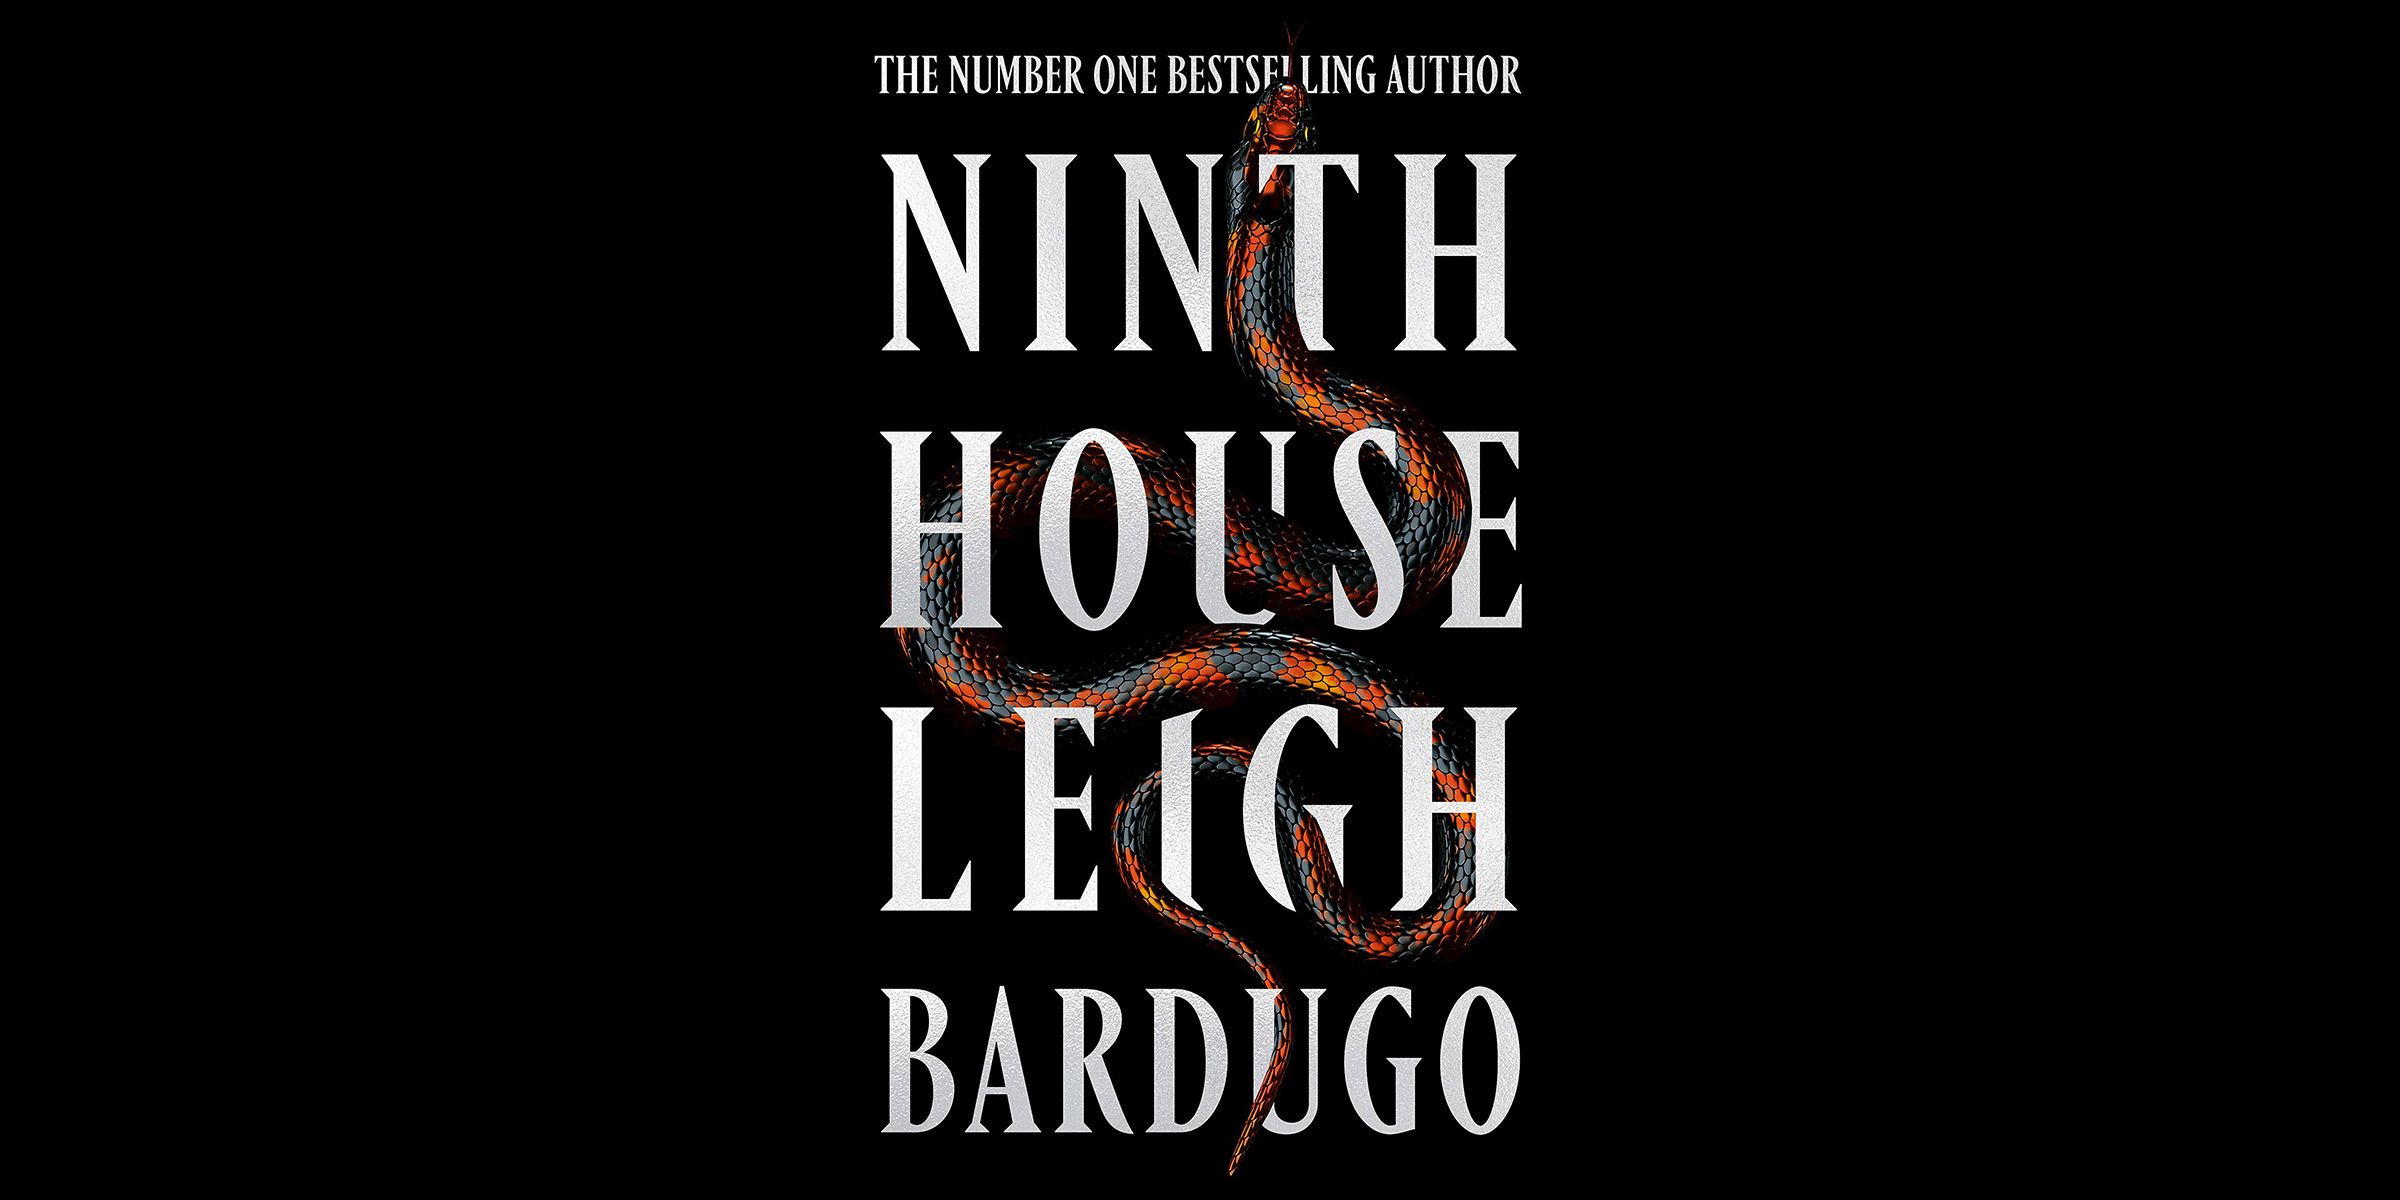 The cover of Ninth House  by Leigh Bardugo